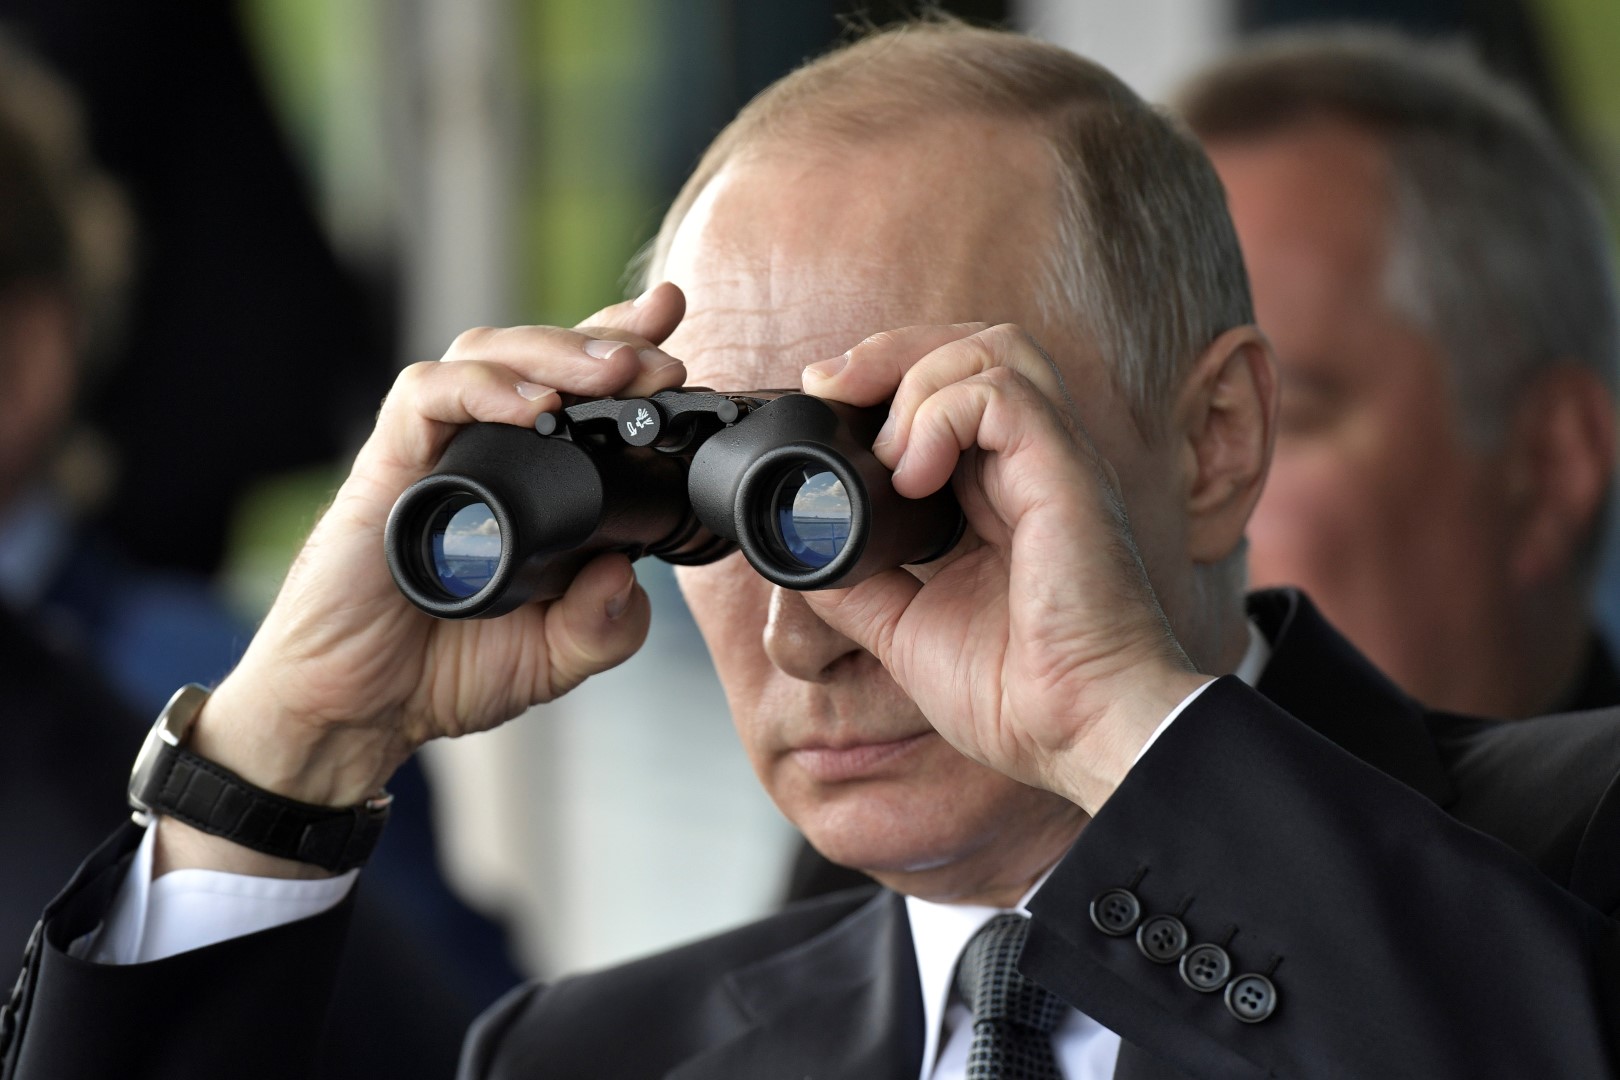 Russian President Vladimir Putin uses a pair of binoculars as he watches a display during the MAKS 2017 air show in Zhukovsky, outside Moscow, Russia July 18, 2017. Sputnik/Alexei Nikolsky/Kremlin via REUTERS ATTENTION EDITORS - THIS IMAGE WAS PROVIDED BY A THIRD PARTY. TPX IMAGES OF THE DAY - RTX3BX3L